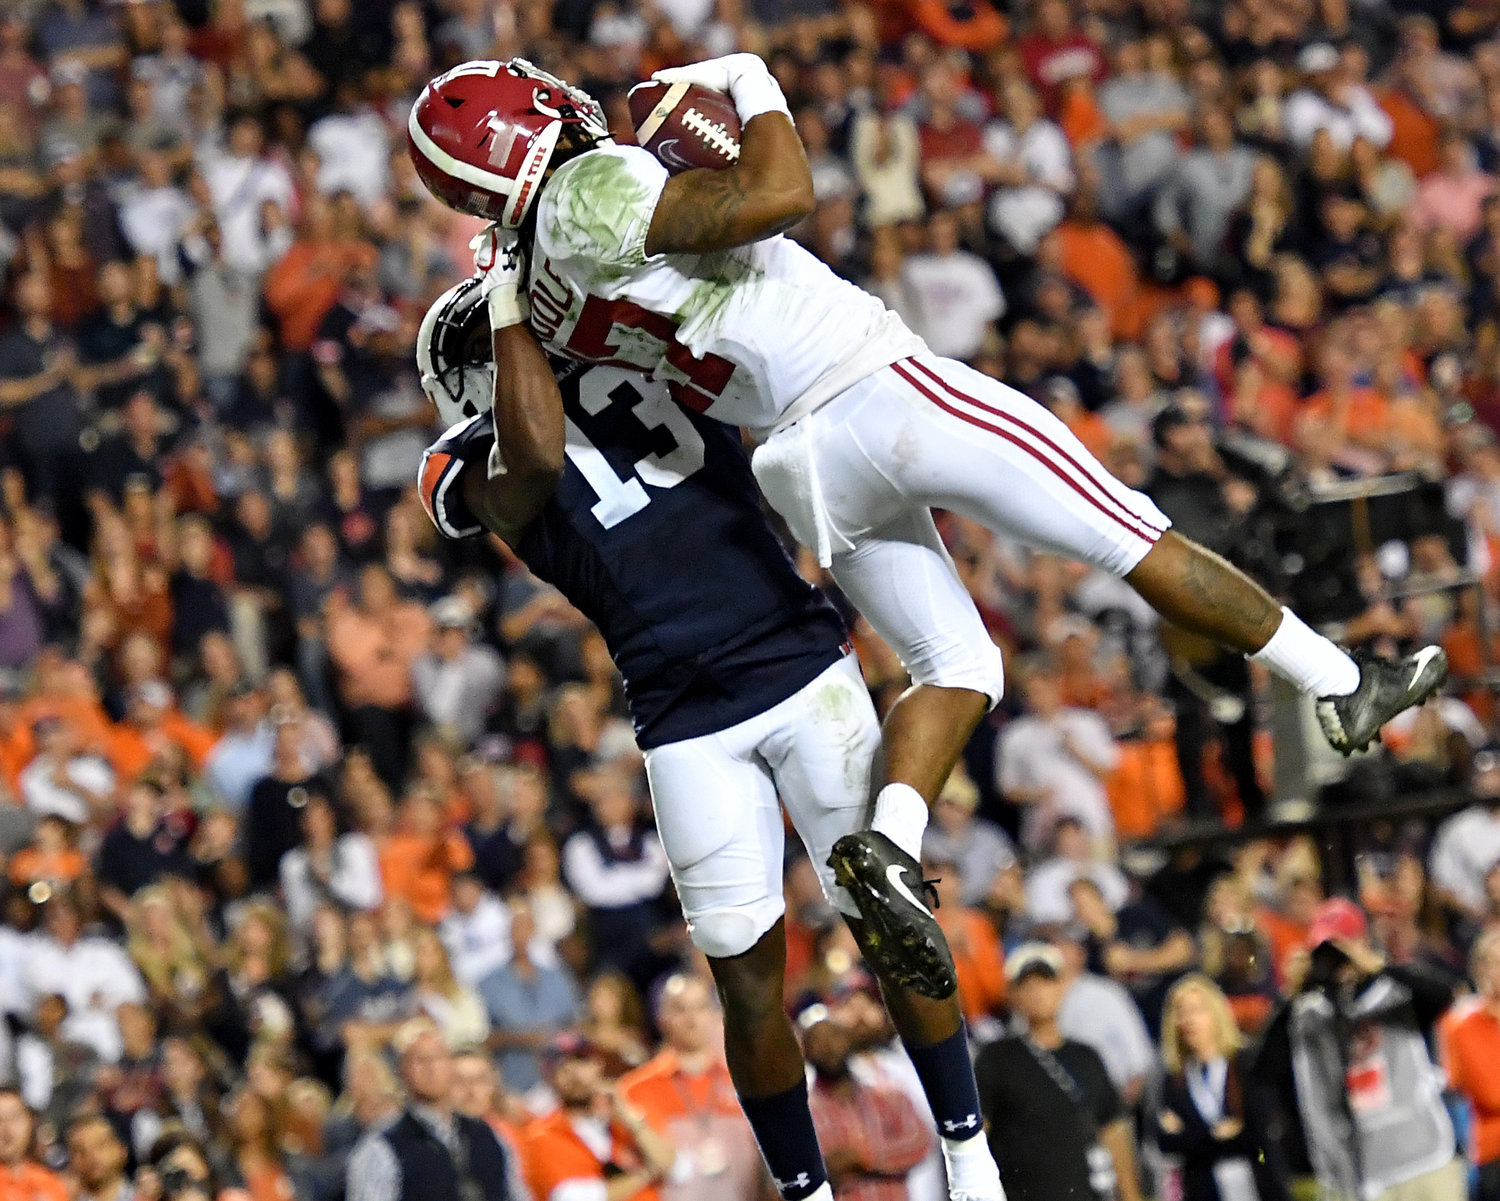 Alabama Crimson Tide wide receiver Jaylen Waddle (17) leaps for the touchdown catch during the second half of an NCAA football game against the Auburn Tigers Saturday, Nov. 30, 2019, at Jordan-Hare Stadium in Auburn, Ala.